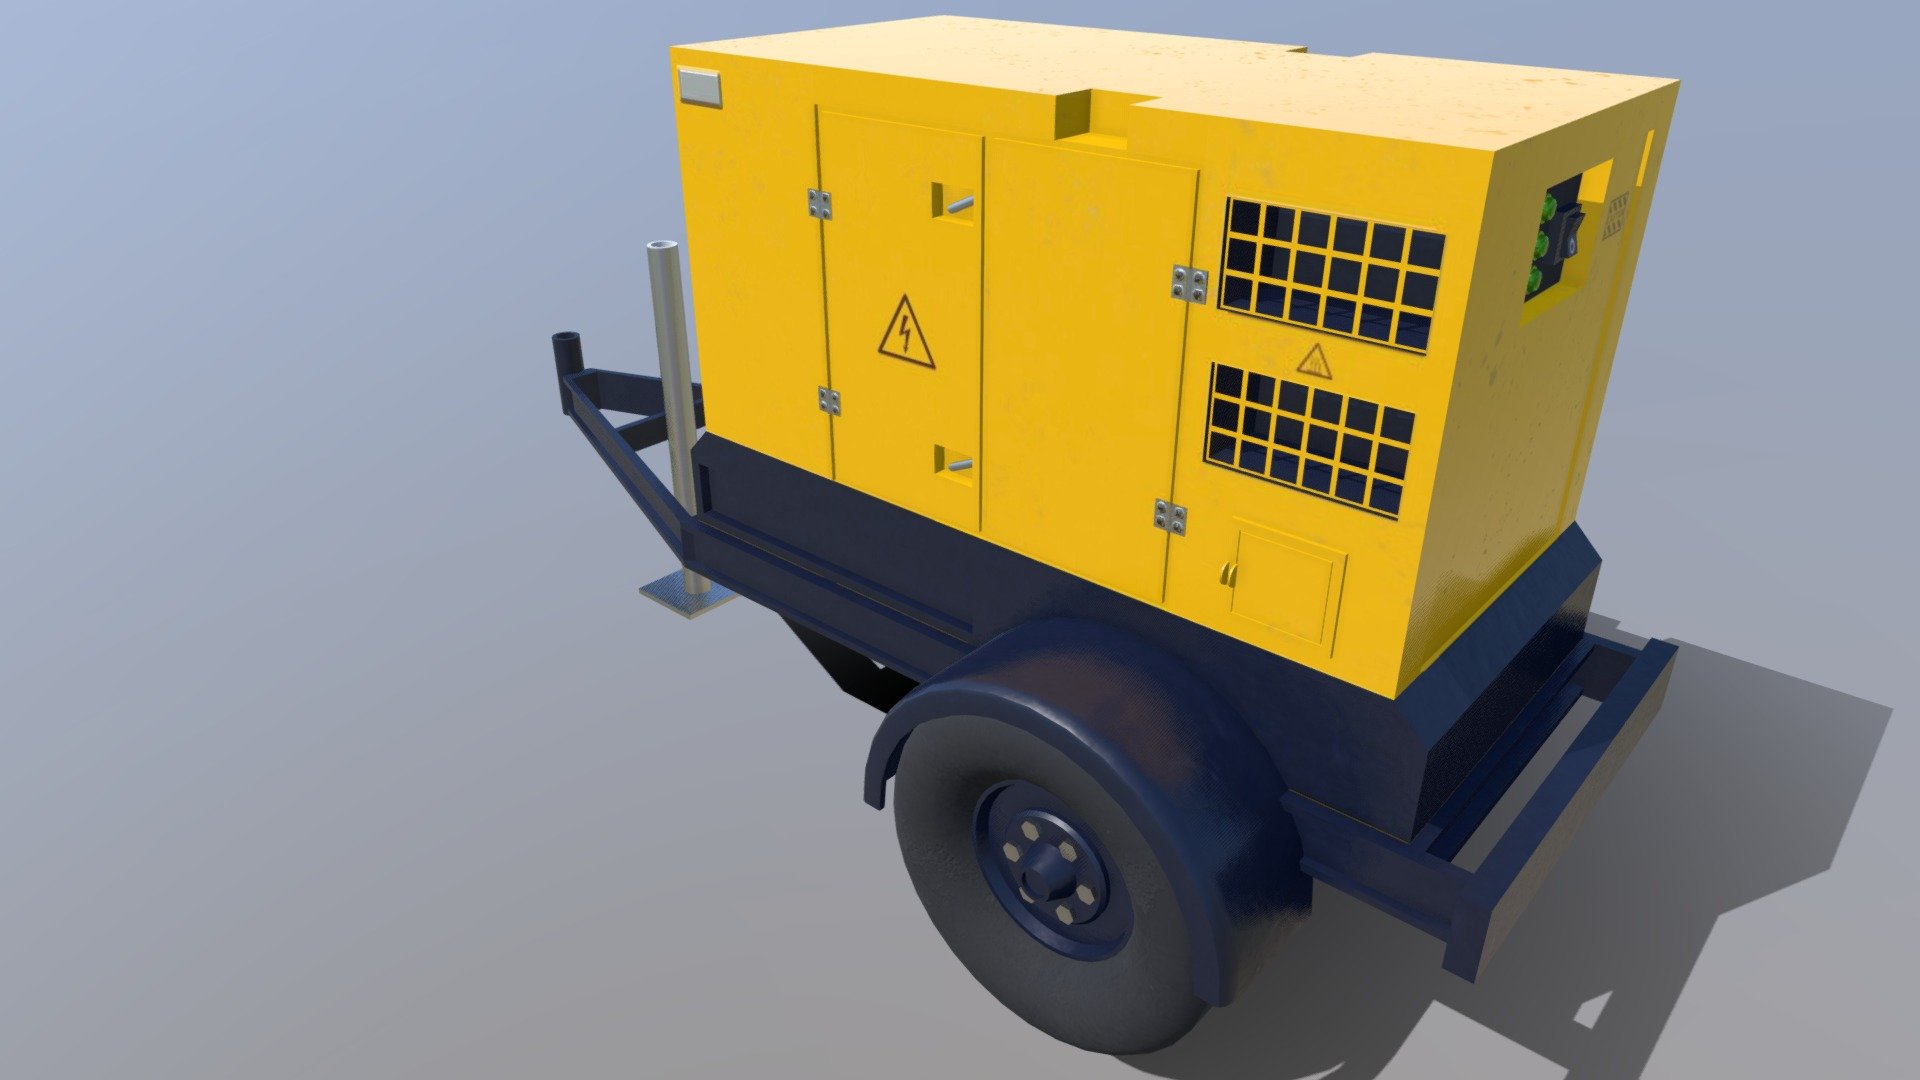 A large portable generator. 
Created in Blender 2.79 (Cycles) and textured in Substance Painter.
Uses metallic/roughness workflow.
Included files:
* Original Blender file (setup ready to render)
* FBX exported model
* Texture files: base color, roughness, metallic and roughness
* HDR background image (free CC0 from HDRI Haven) - Large Portable Generator - Buy Royalty Free 3D model by Alex Mees (@alexmees) 3d model